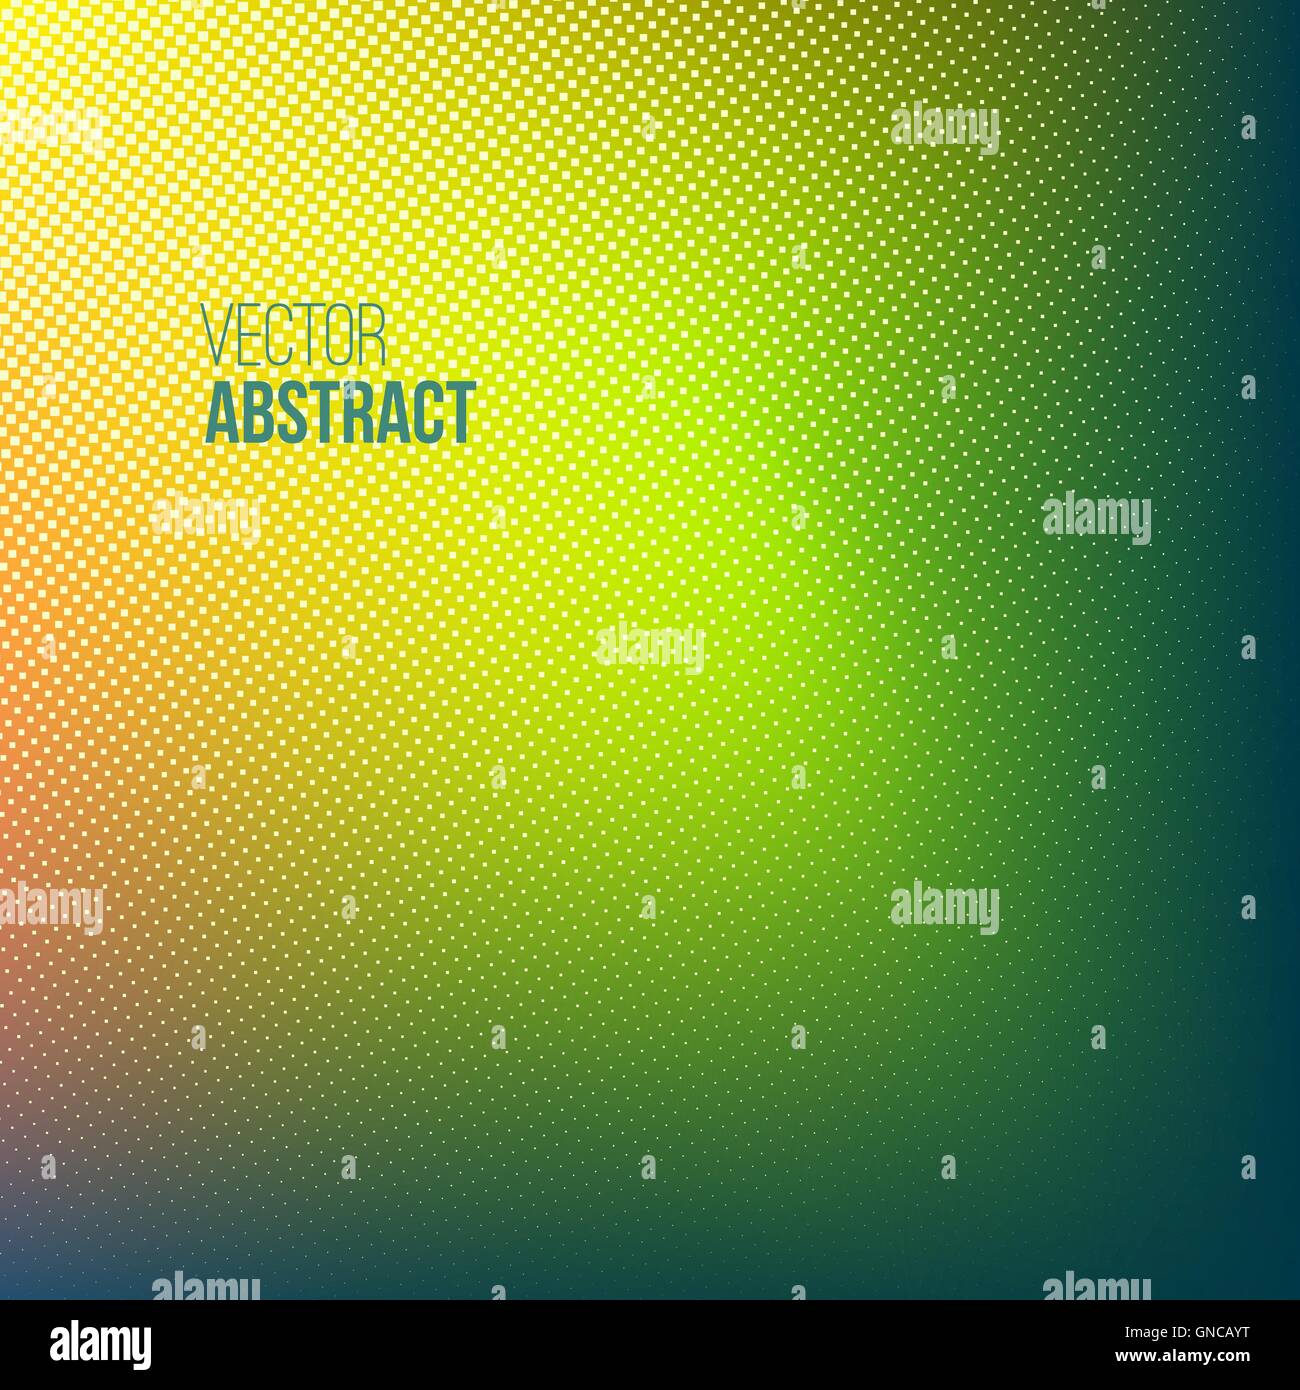 Halftone background. Green abstract spotted pattern. Stock Vector